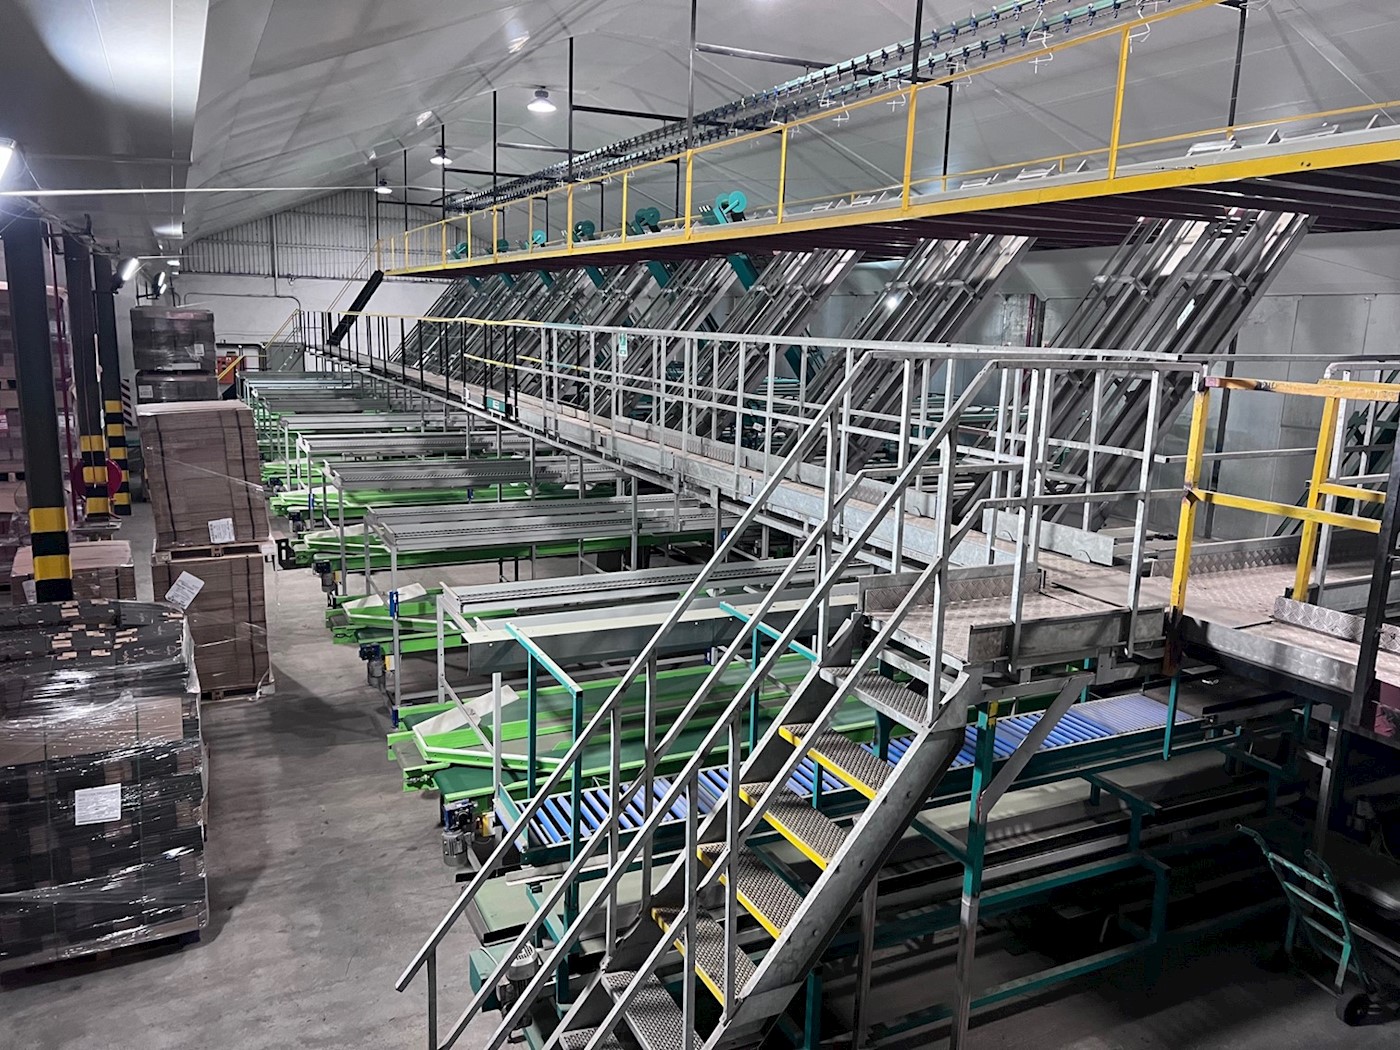 Large Fruit Packing line, 2 Solomon Street, Wolseley/Ceres Valley, Western Cape, South Africa 1/10